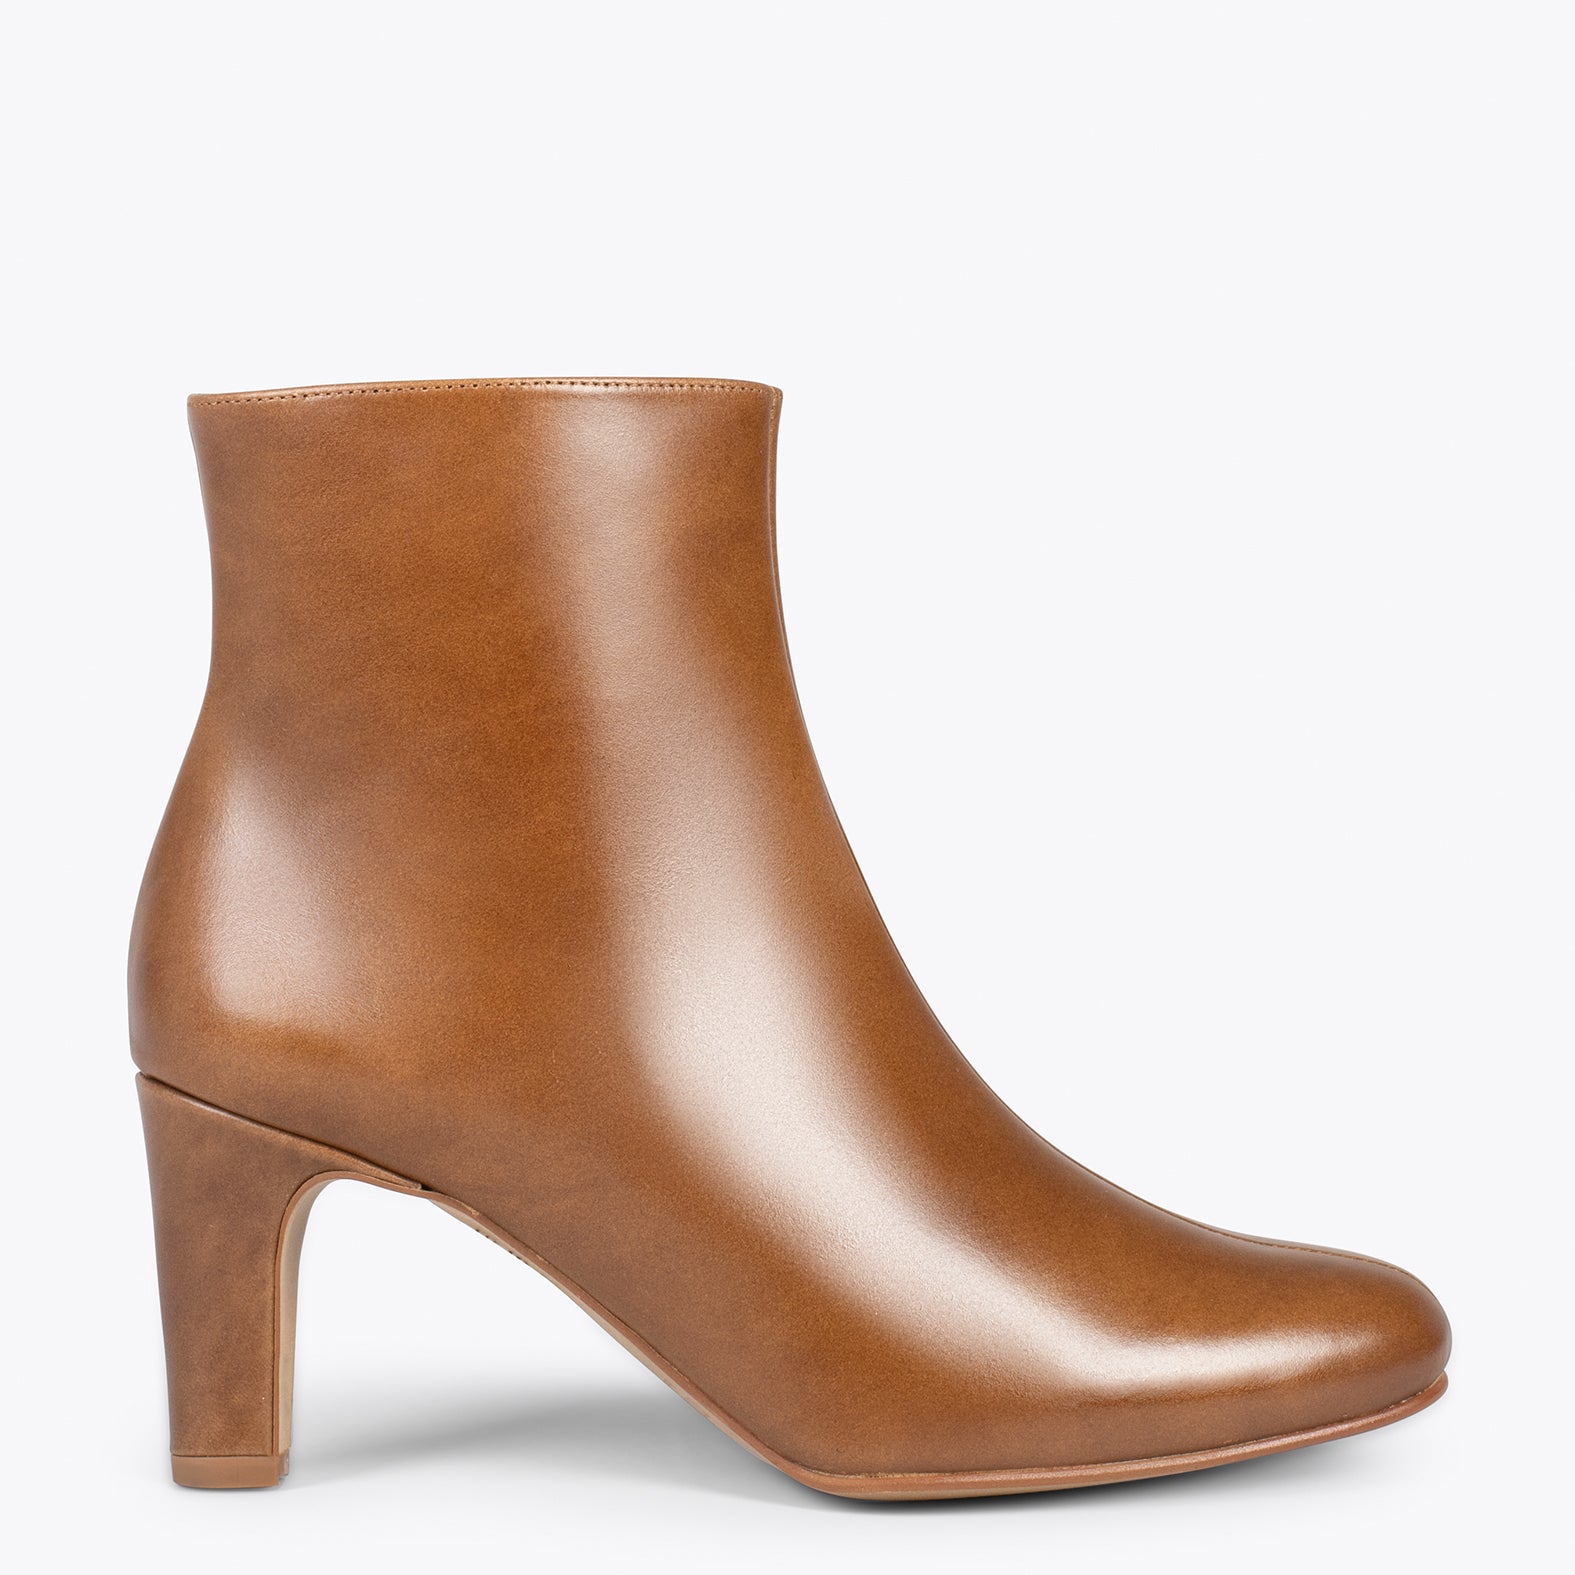 DAILY – CAMEL leather bootie